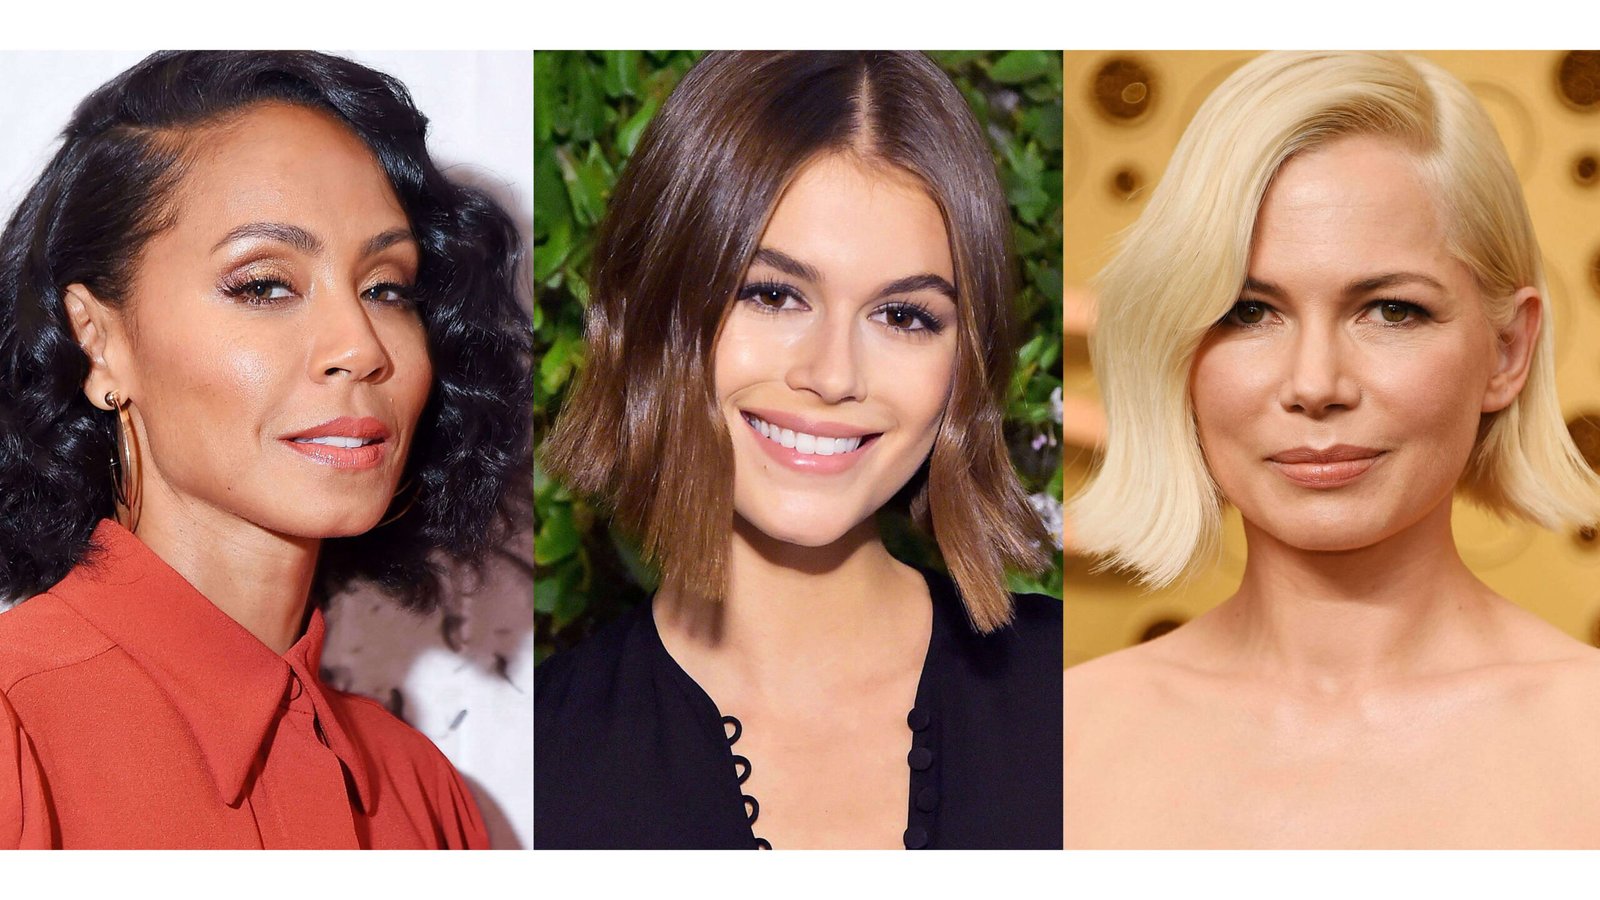 Arrange A Style Collection That Makes Your Hair Look Gorgeous Short Hair Guide.